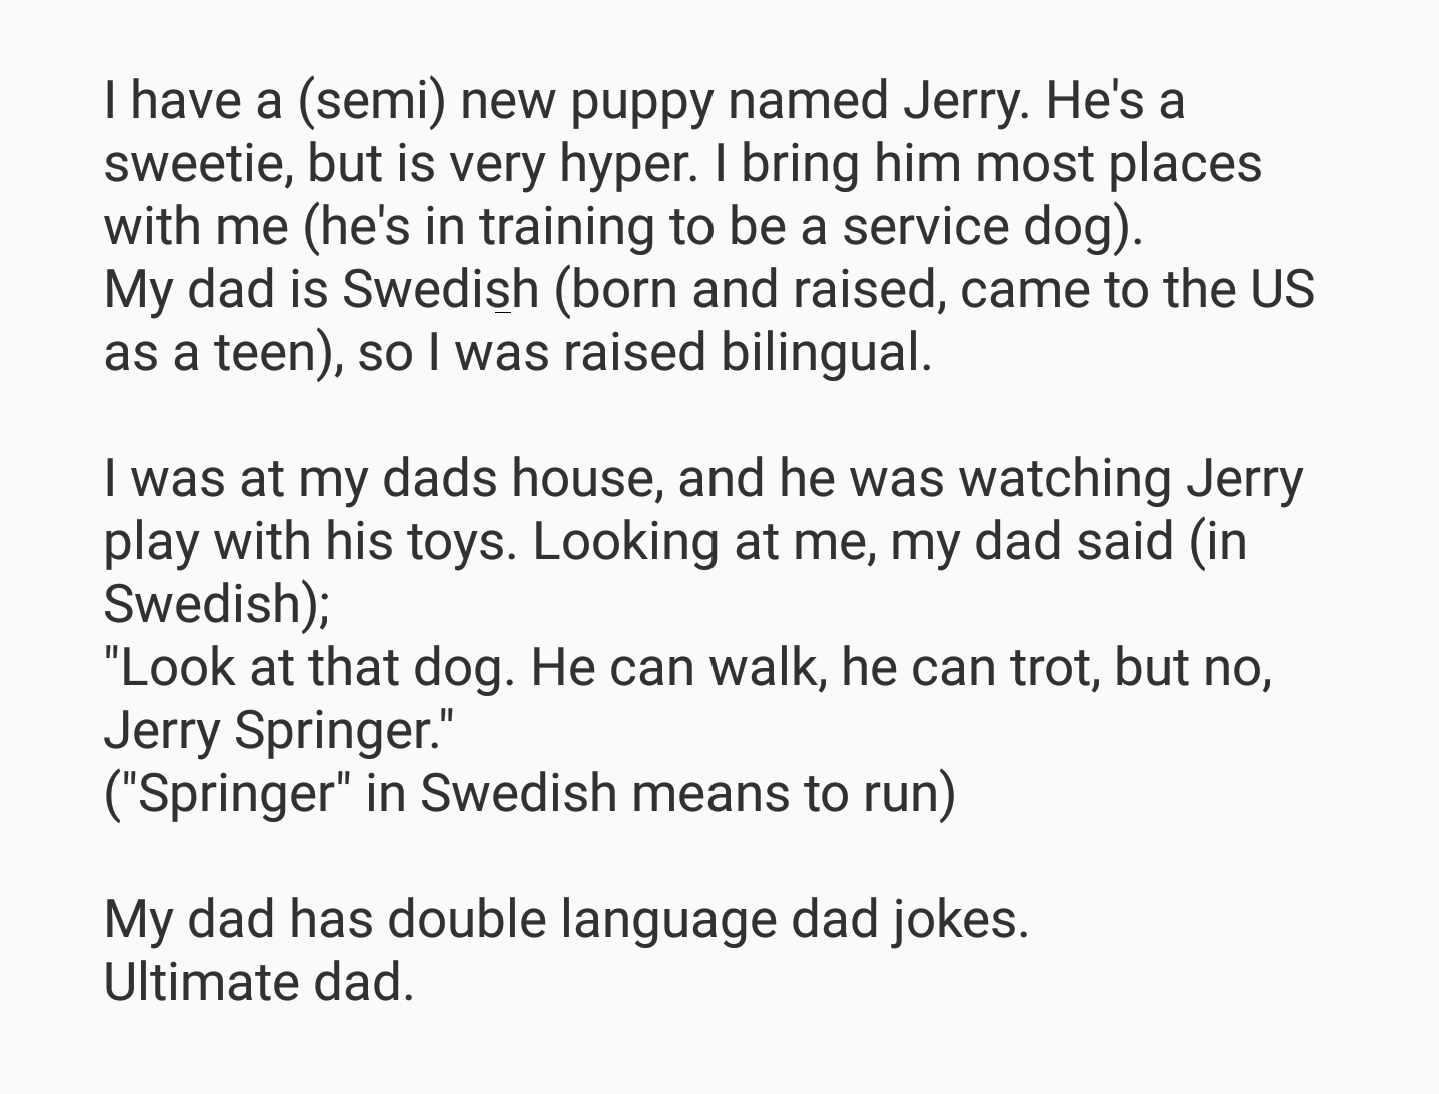 angle - I have a semi new puppy named Jerry. He's a sweetie, but is very hyper. I bring him most places with me he's in training to be a service dog. My dad is Swedish born and raised, came to the Us as a teen, so I was raised bilingual. I was at my dads 